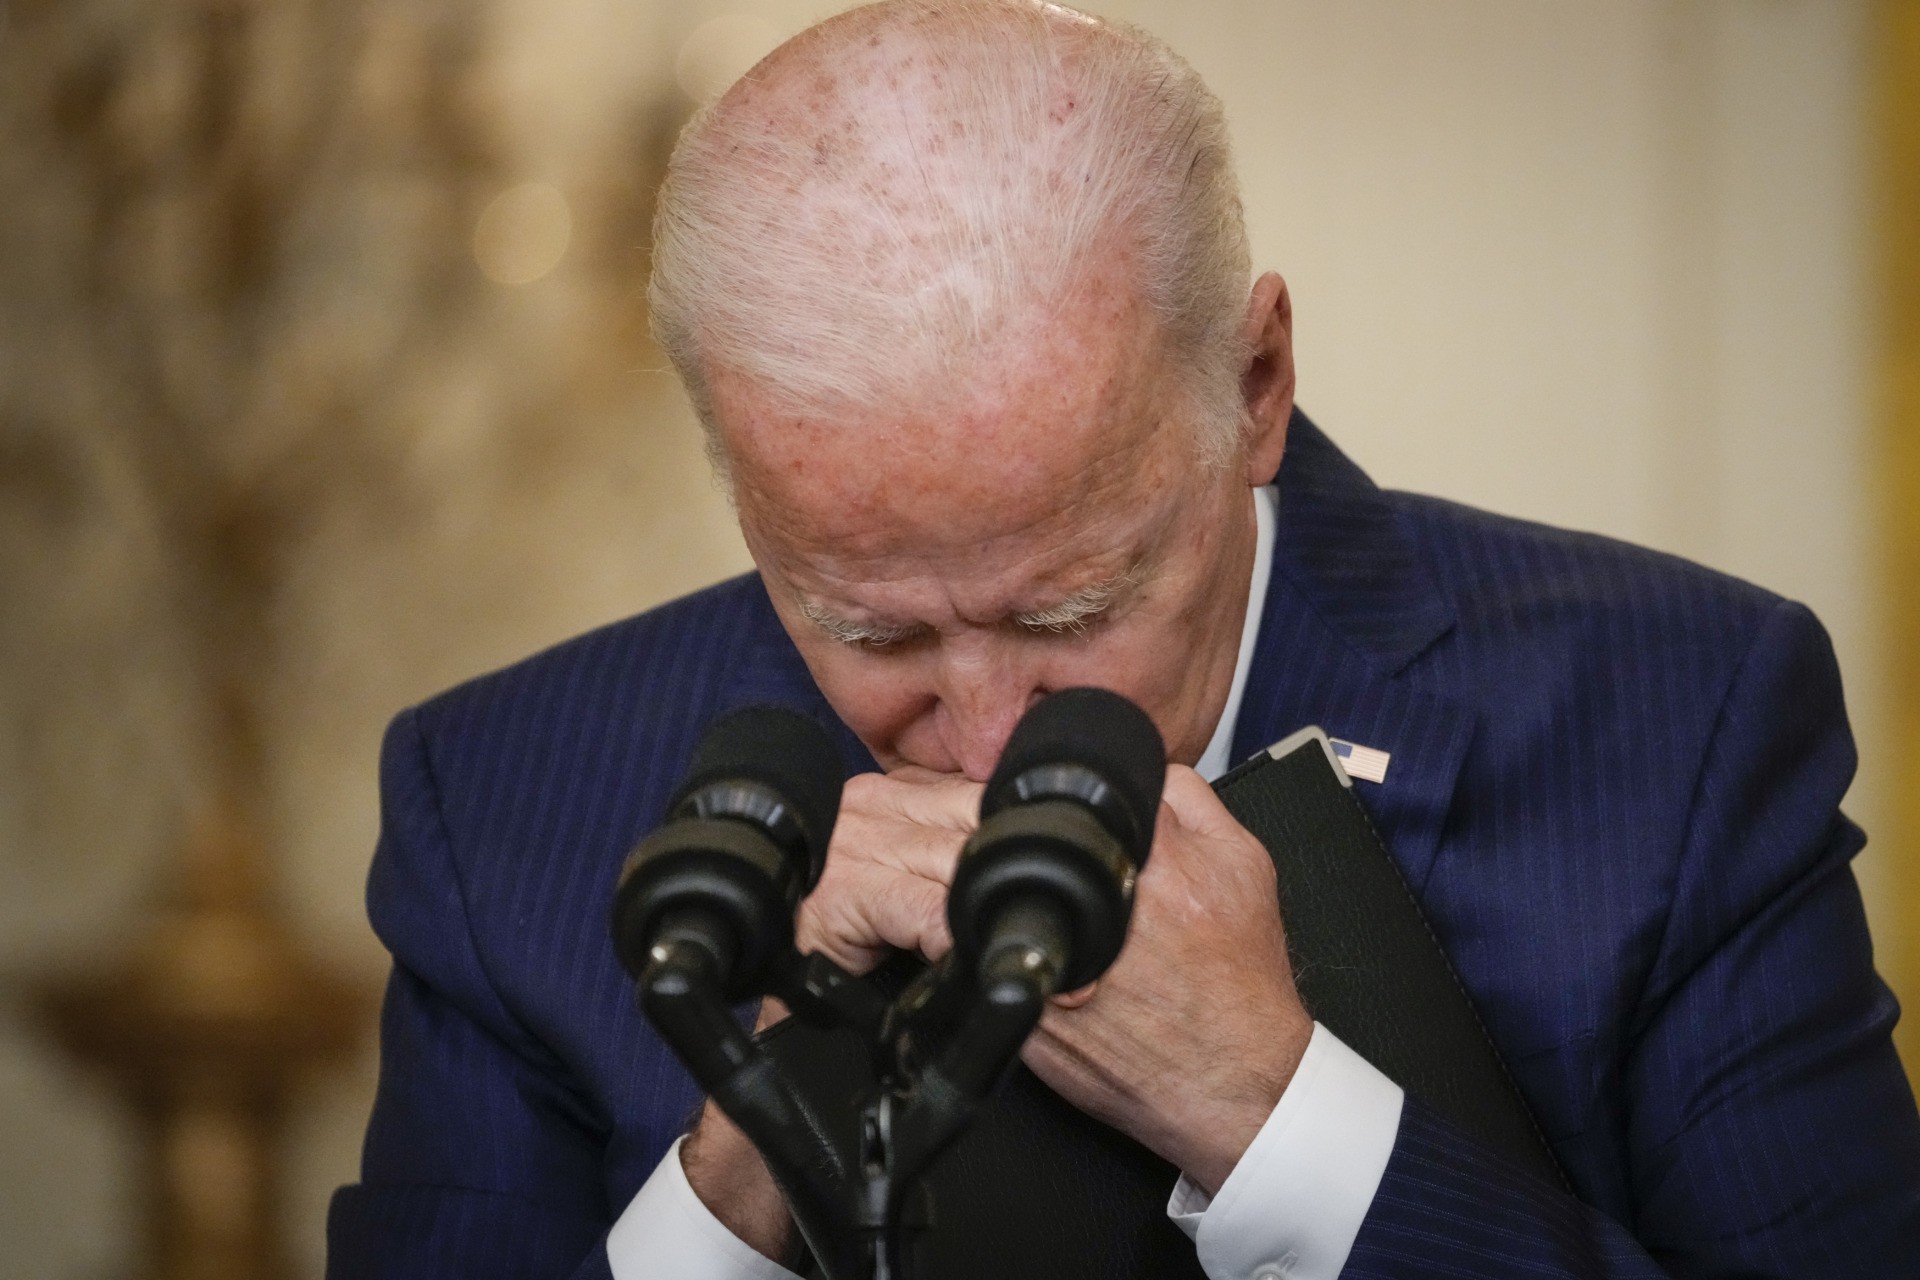 WASHINGTON, DC - AUGUST 26: U.S. President Joe Biden pauses while listening to a question from a reporter about the situation in Afghanistan in the East Room of the White House on August 26, 2021 in Washington, DC. At least 12 American service members were killed on Thursday by suicide bomb attacks near the Hamid Karzai International Airport in Kabul, Afghanistan. (Photo by Drew Angerer/Getty Images)